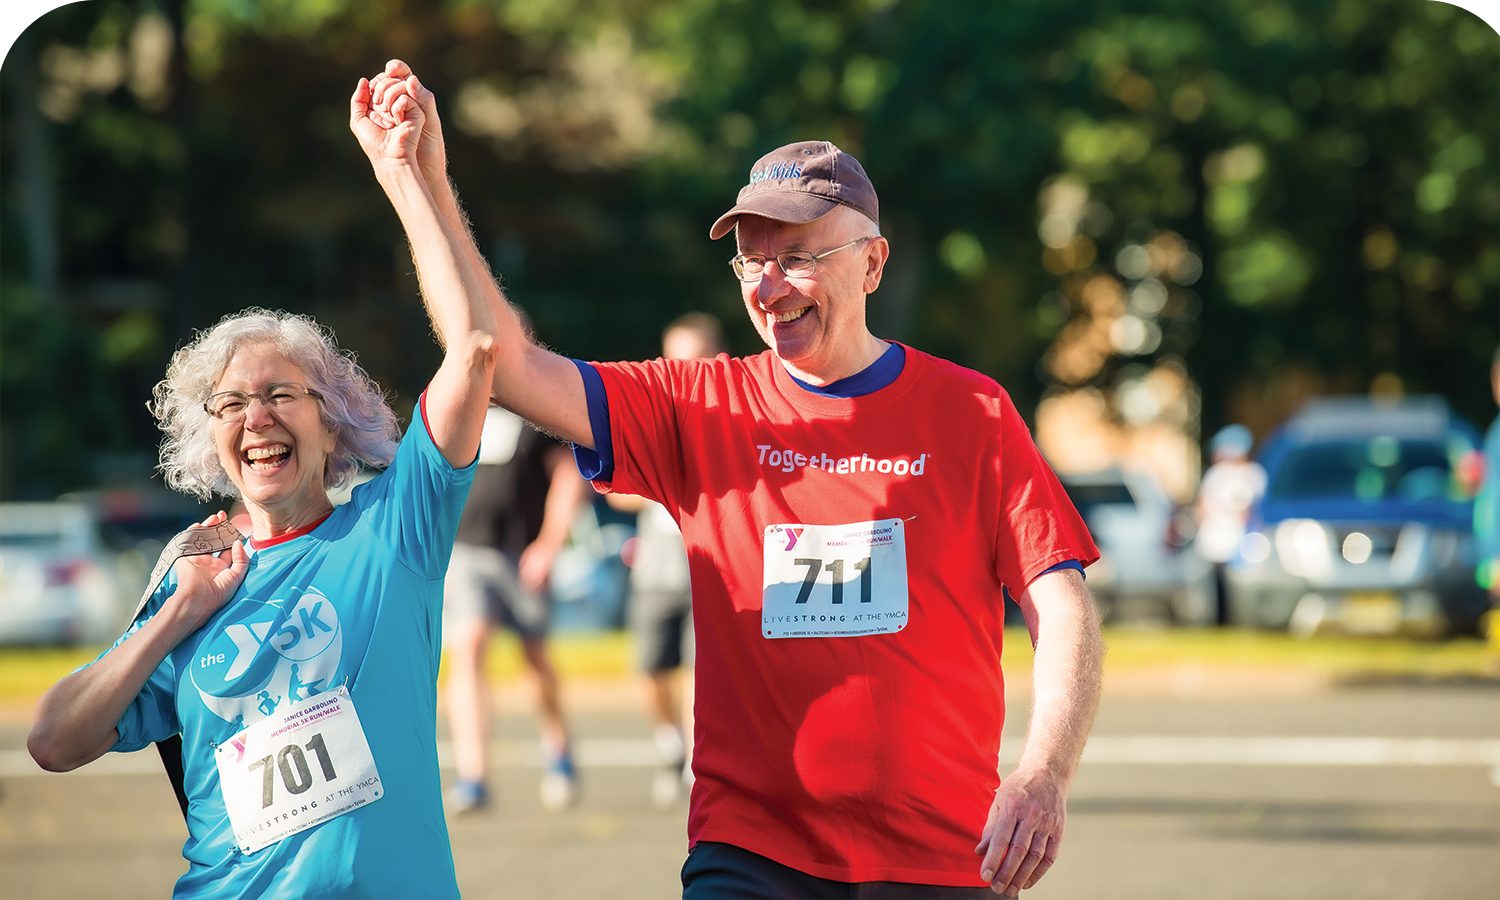 ymca 5k, livestrong at the y, cancer support, charity event